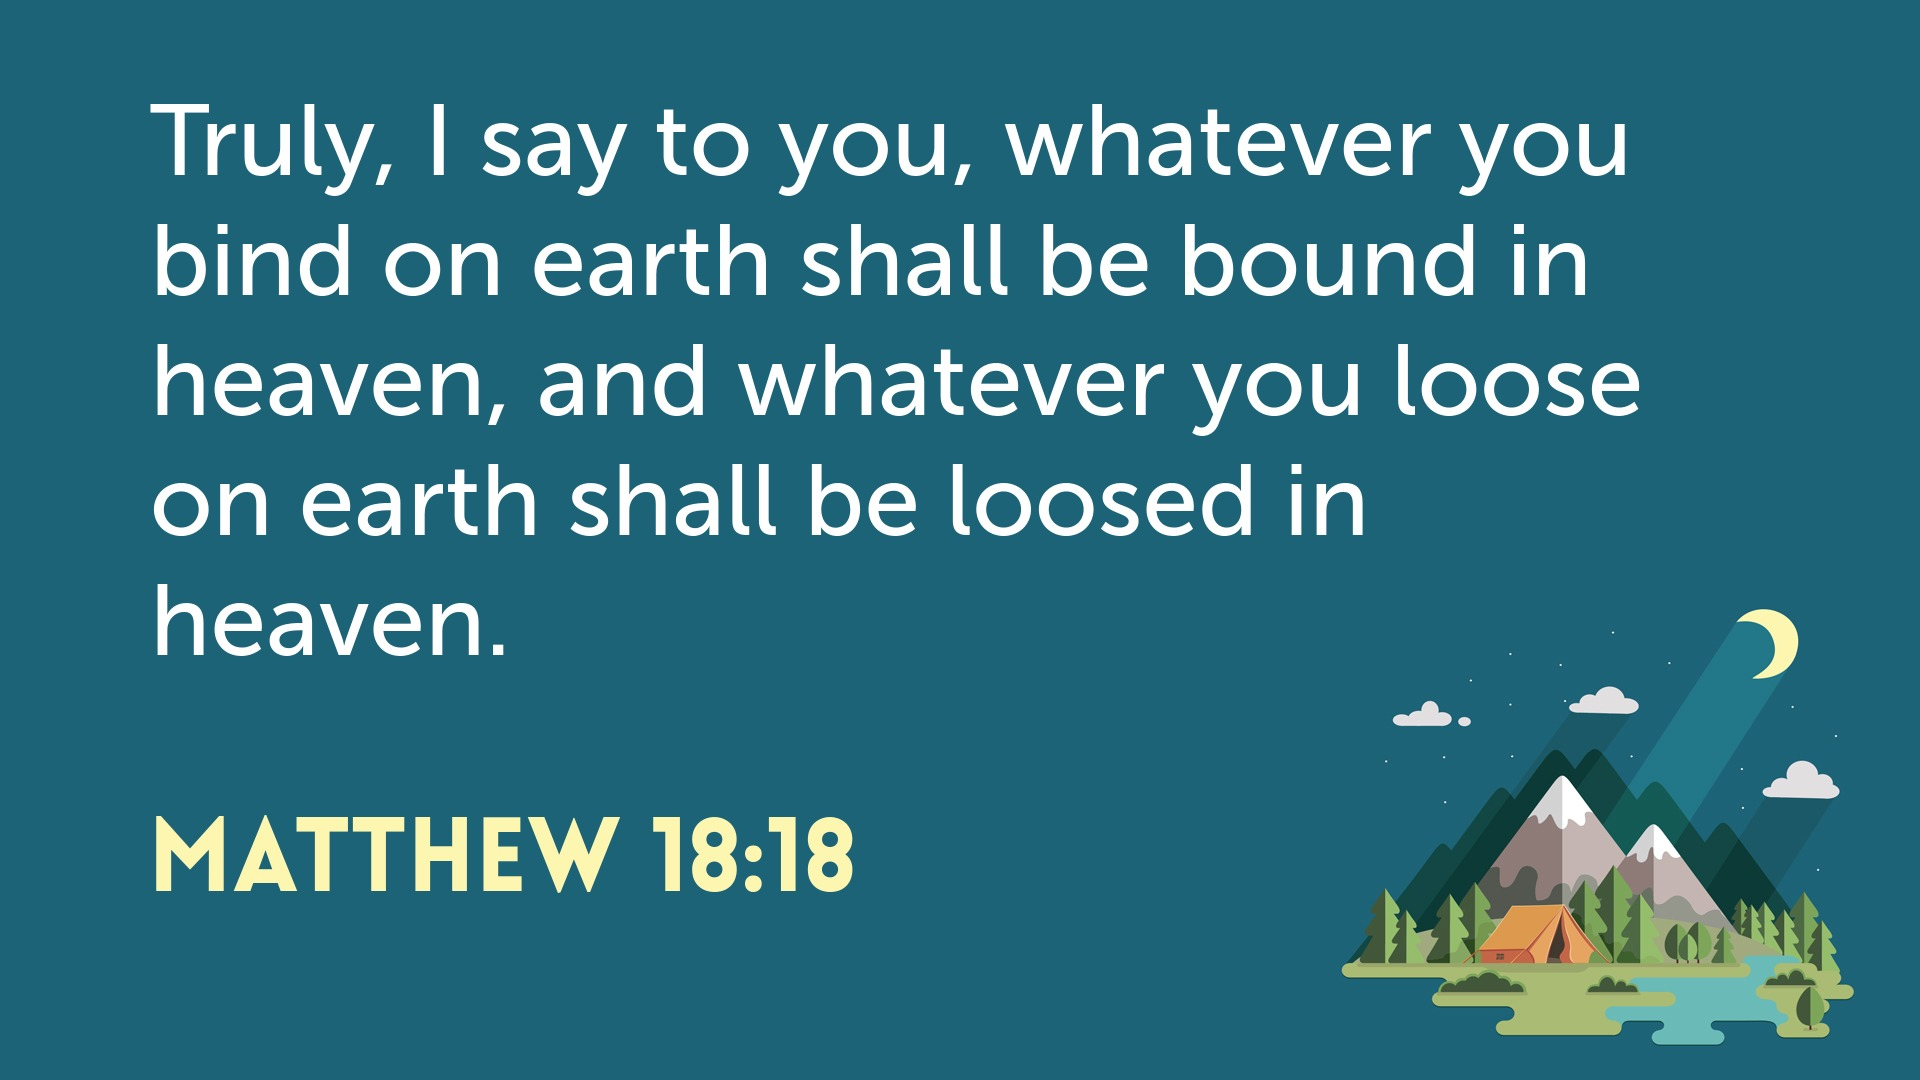 Truly, I say to you, whatever you bind on earth shall be bound in heaven, and whatever you loose on earth shall be loosed in heaven.